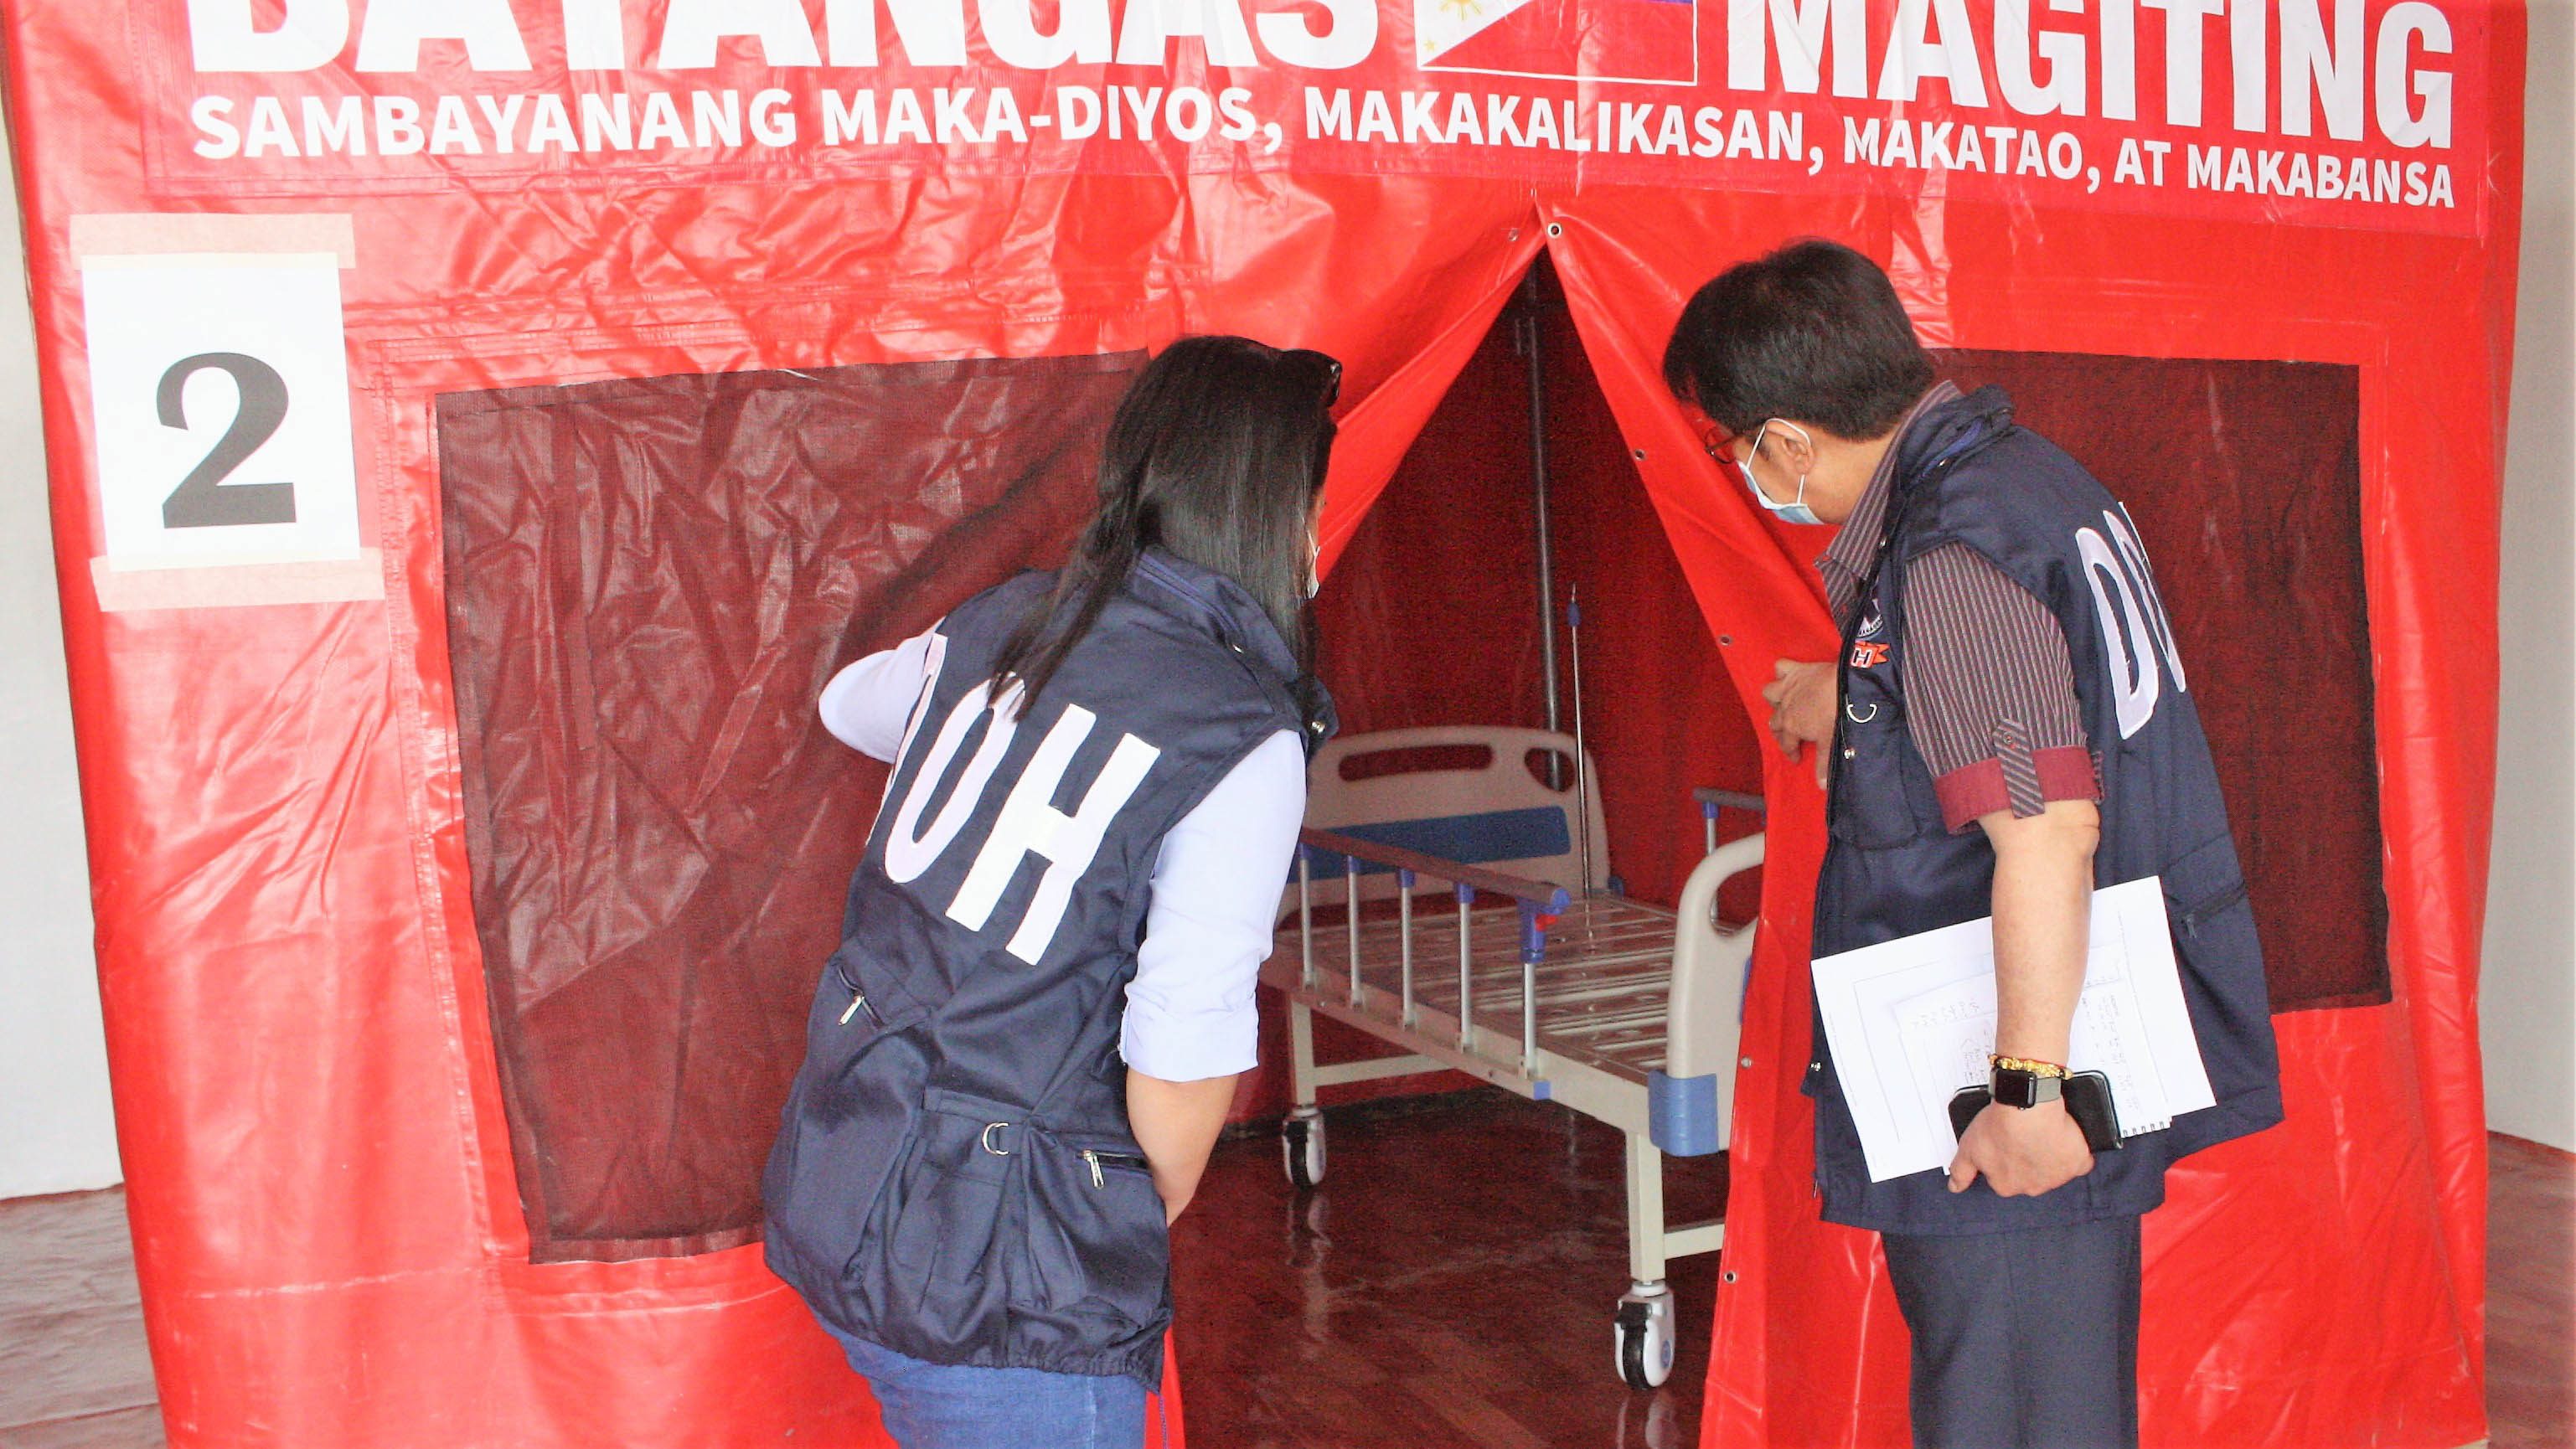 ISOLATION FACILITY. DOH-CALABARZON Regional Director Eduardo C. Janairo (left) inspects the inside of tent which will serve as an isolation unit for persons deprived of liberty who will be tested positive for COVID-19. The Batangas Provincial Isolation Facility is located at Brgy Malainin, Ibaan. Photo from DOH Calabarzon   